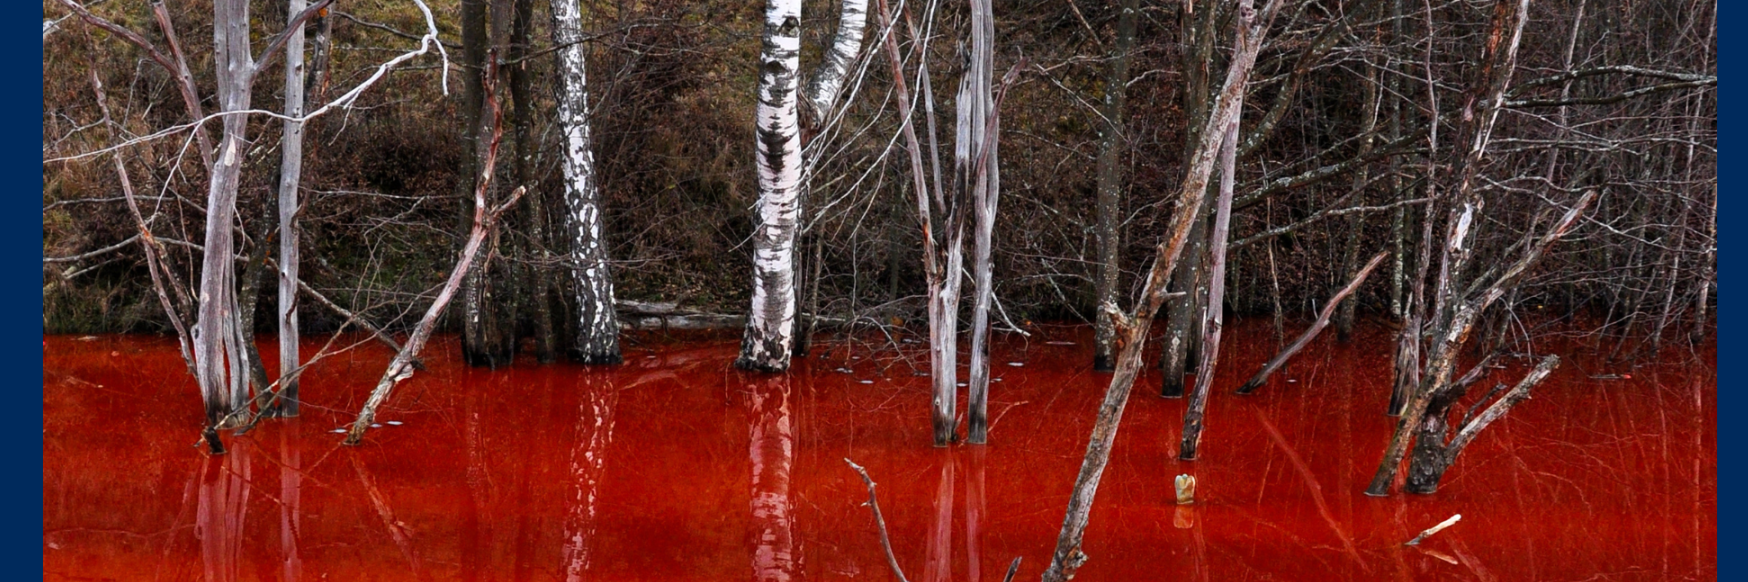 trees in red water